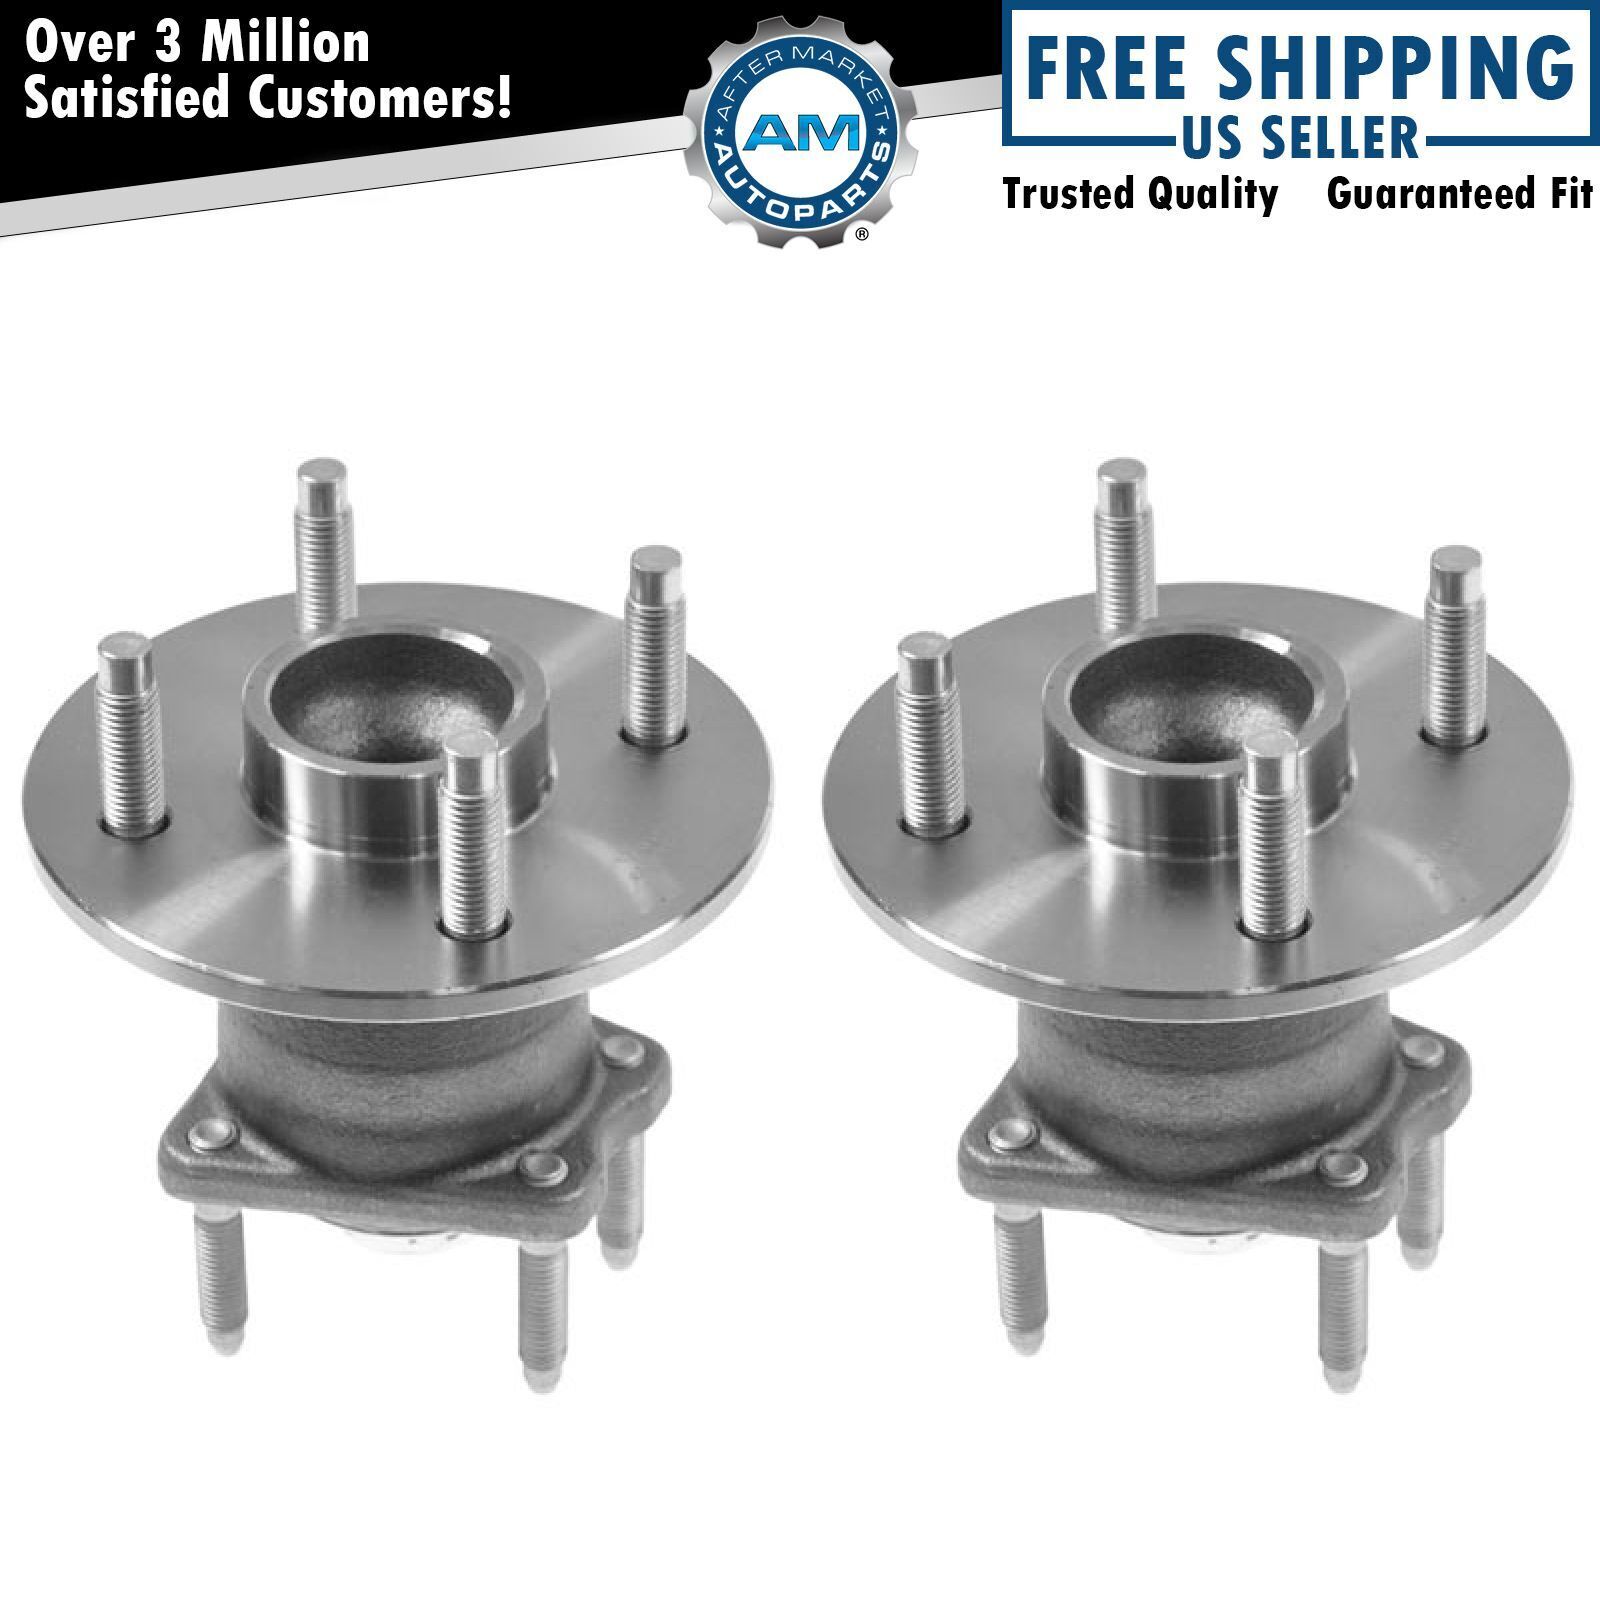 Rear Wheel Hub & Bearing Left & Right Pair Set for Cobalt G5 Pursuit w/o ABS